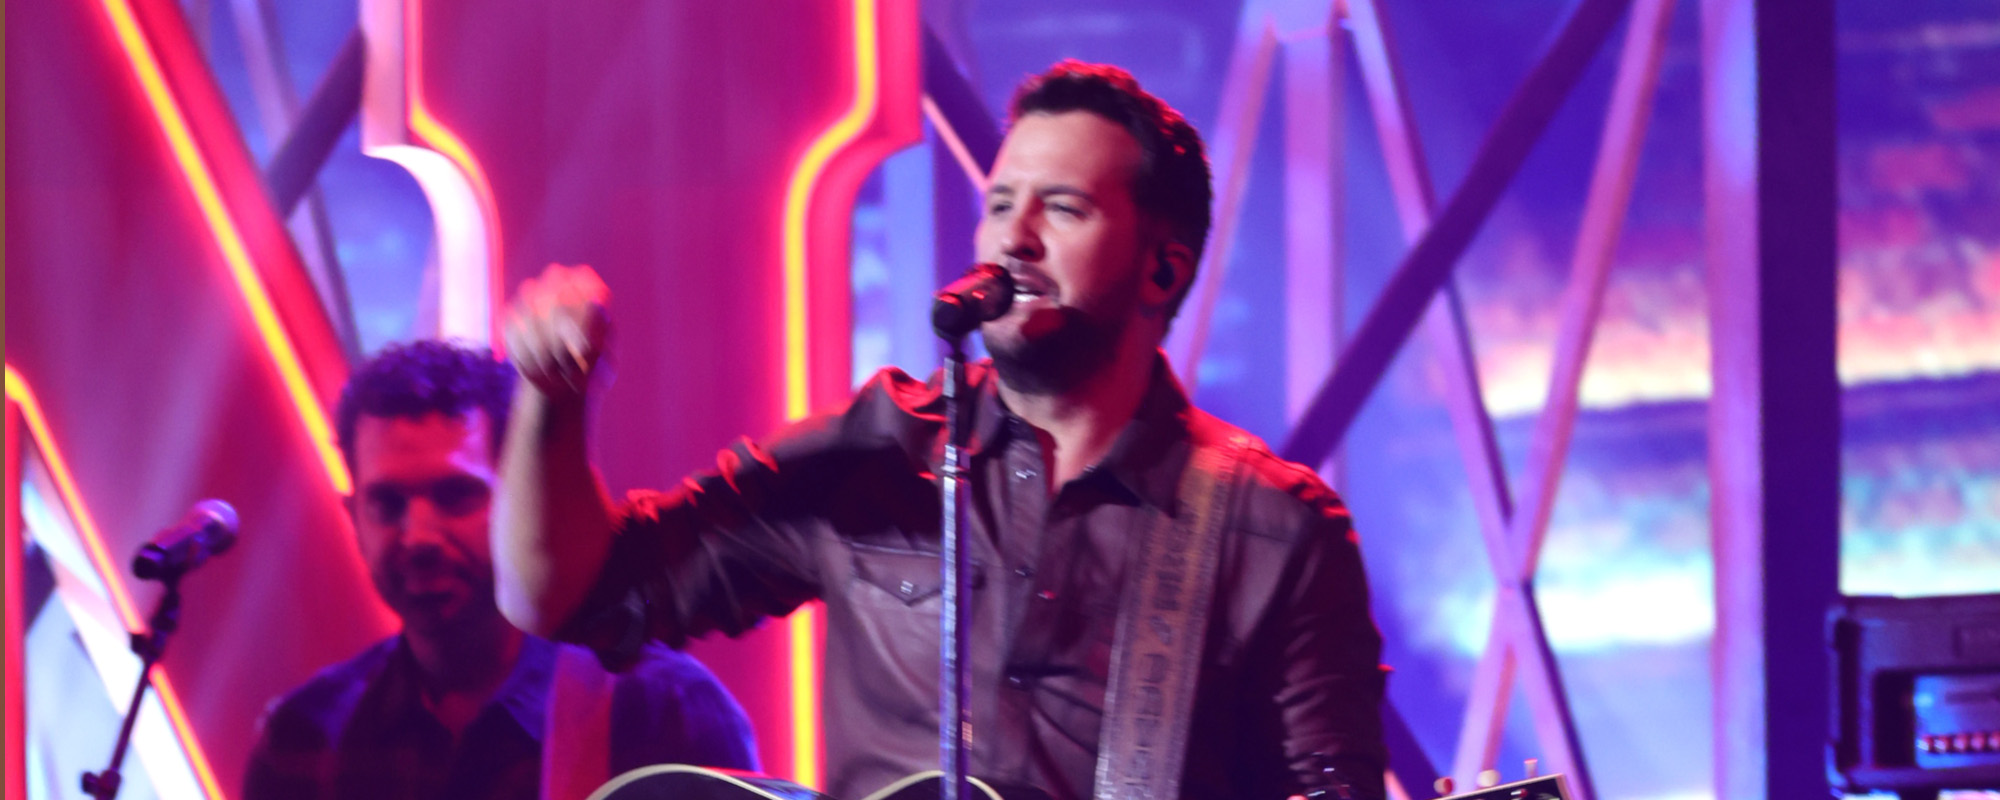 4 Songs You Didn’t Know Luke Bryan Wrote For Other Artists